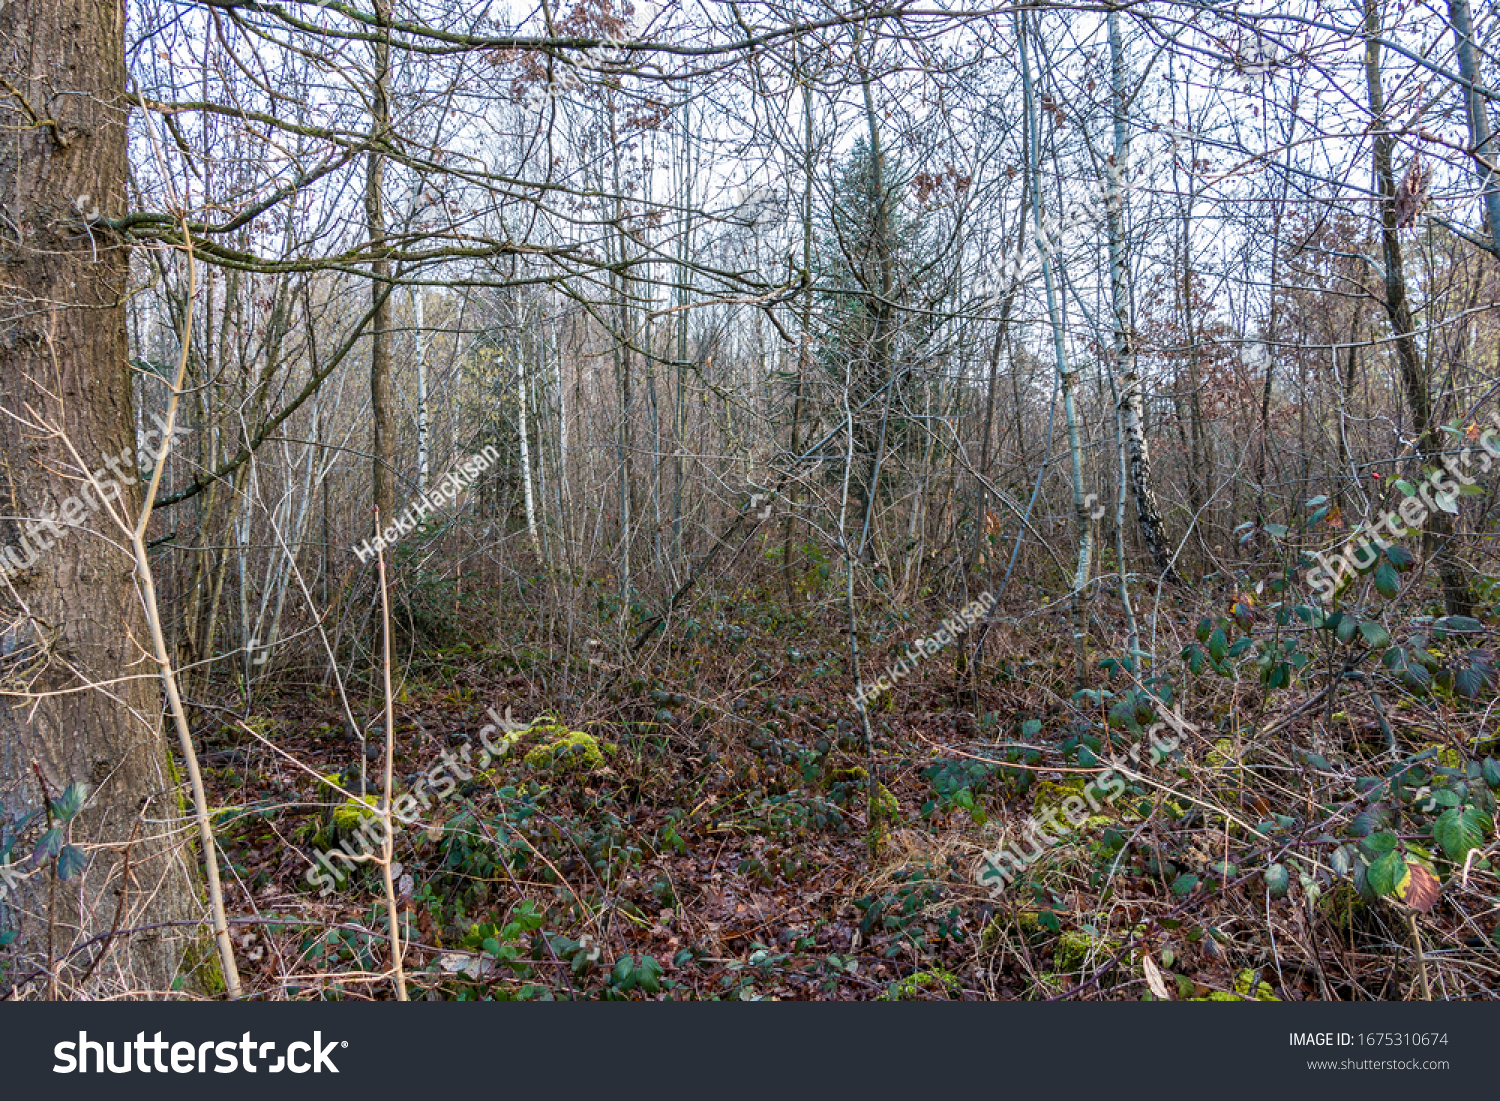 The wilderness of a big forest with thorns and spines #1675310674